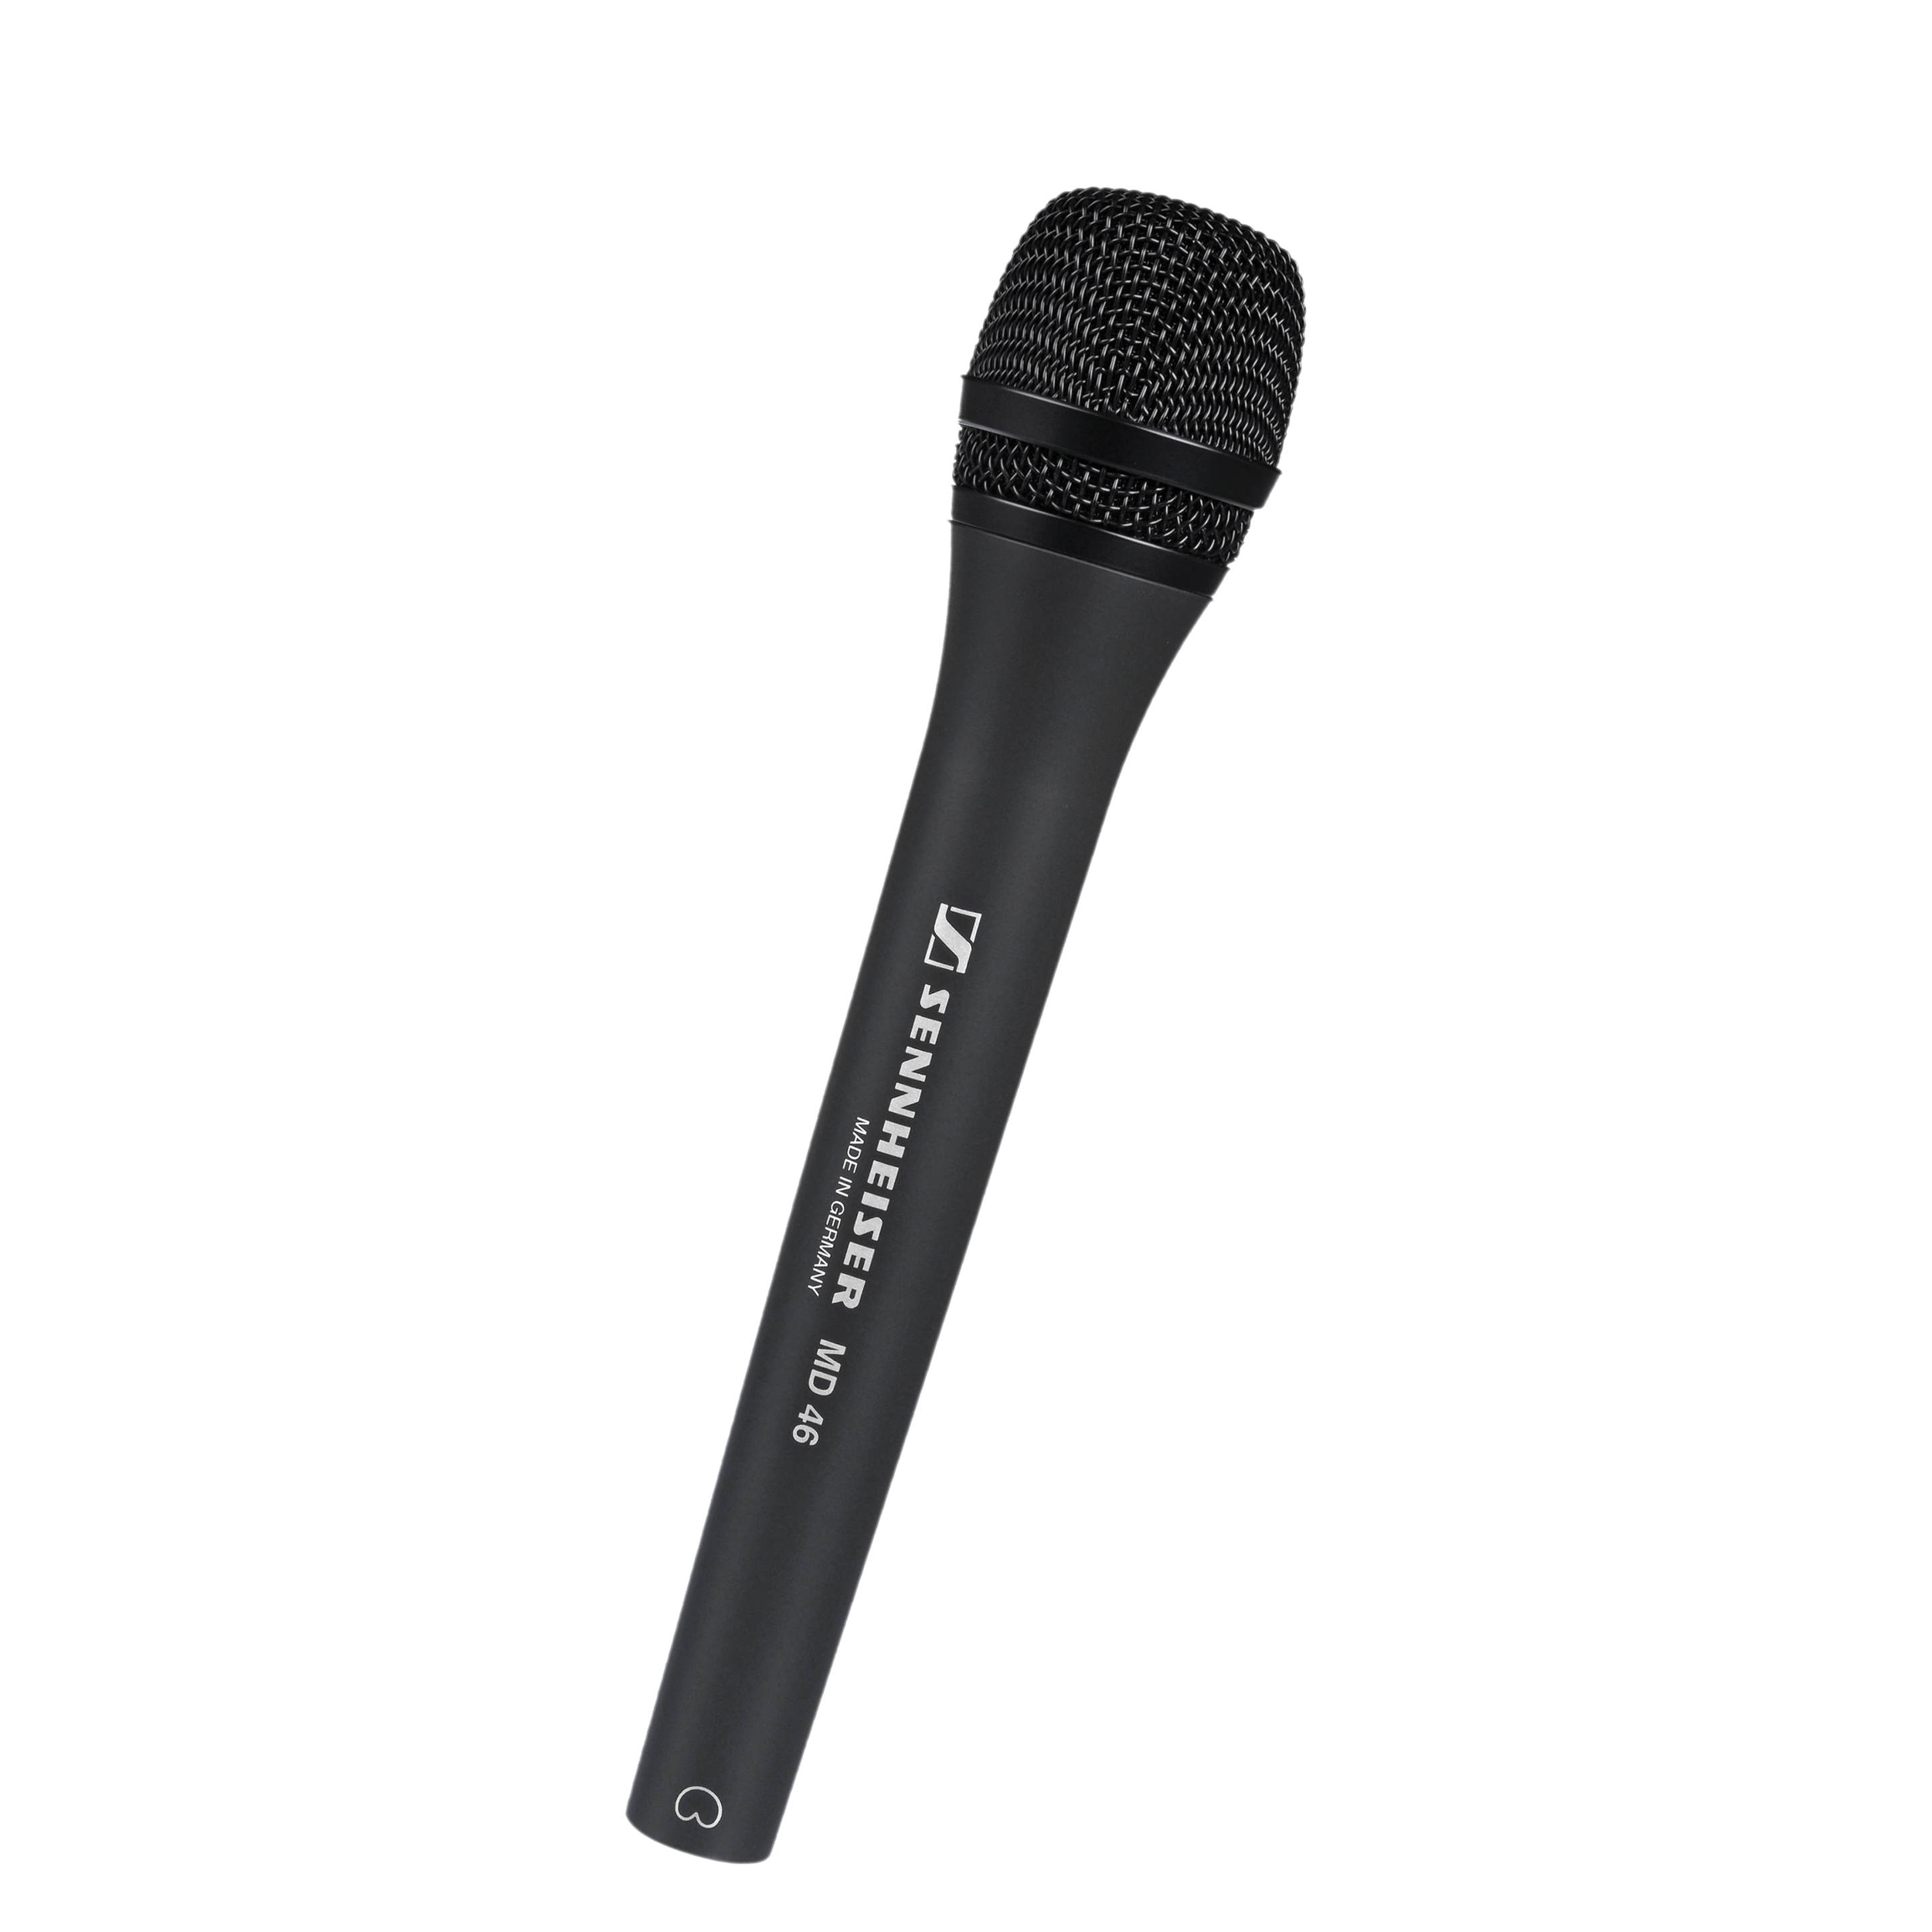 Sennheiser MD 46 Dynamic Microphone for Live Reporting and Broadcasting Environments 005172